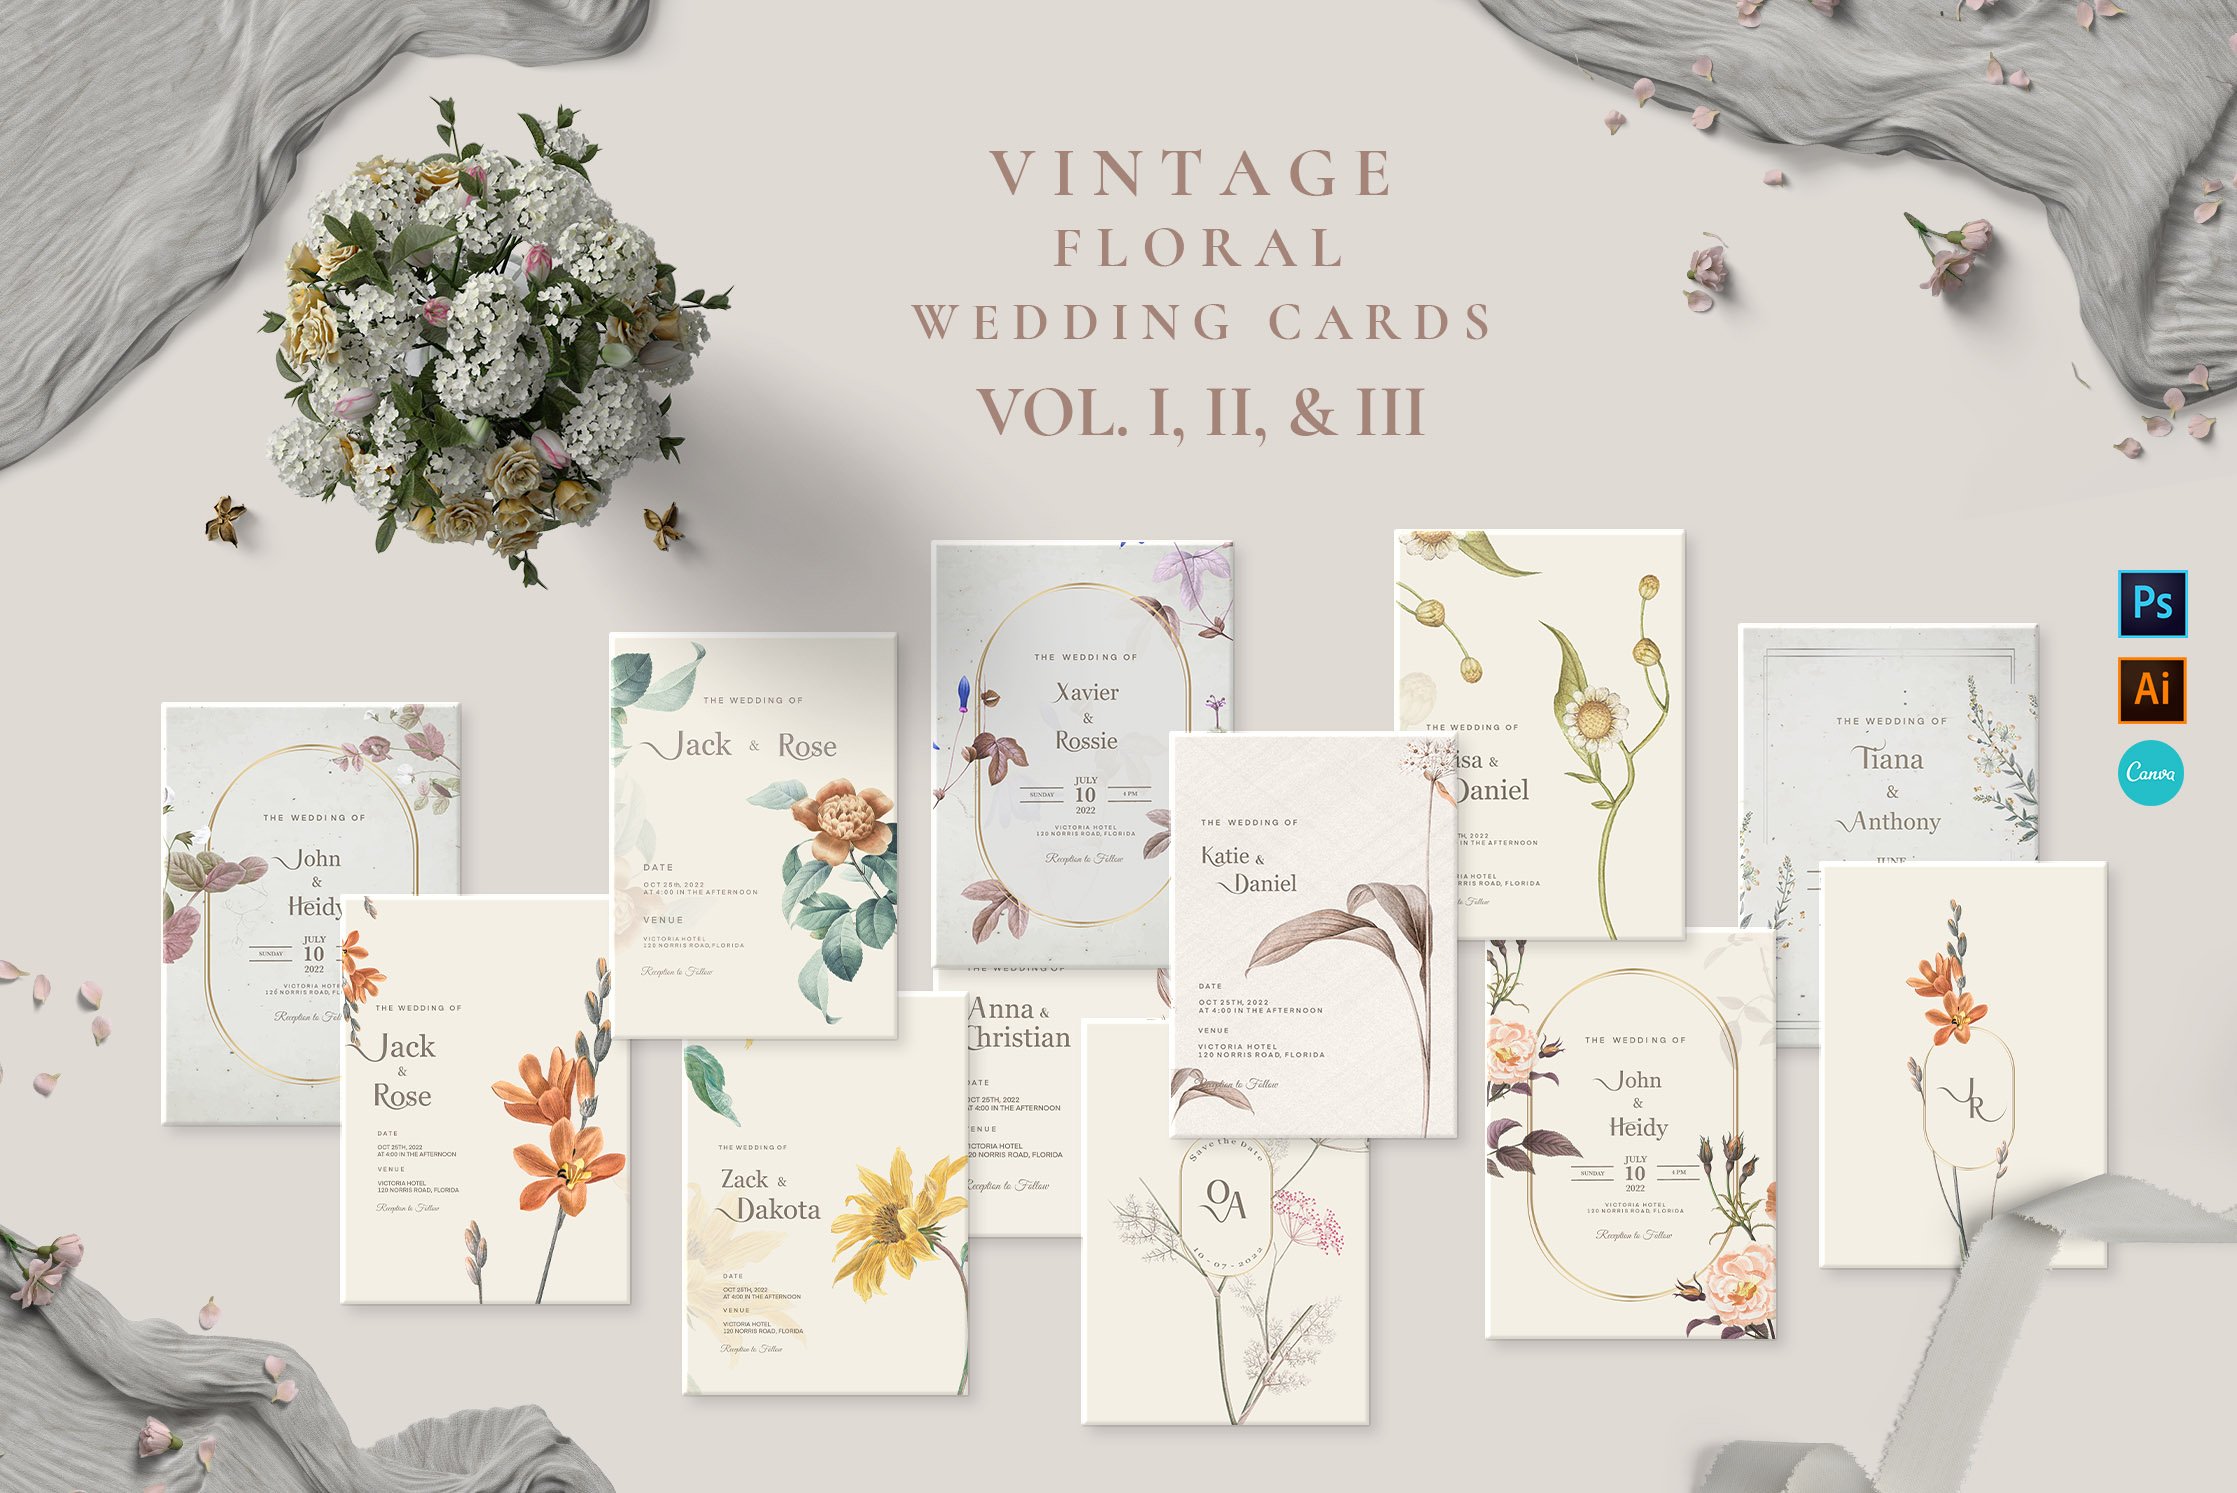 48 Vintage Wedding Cards Collection cover image.